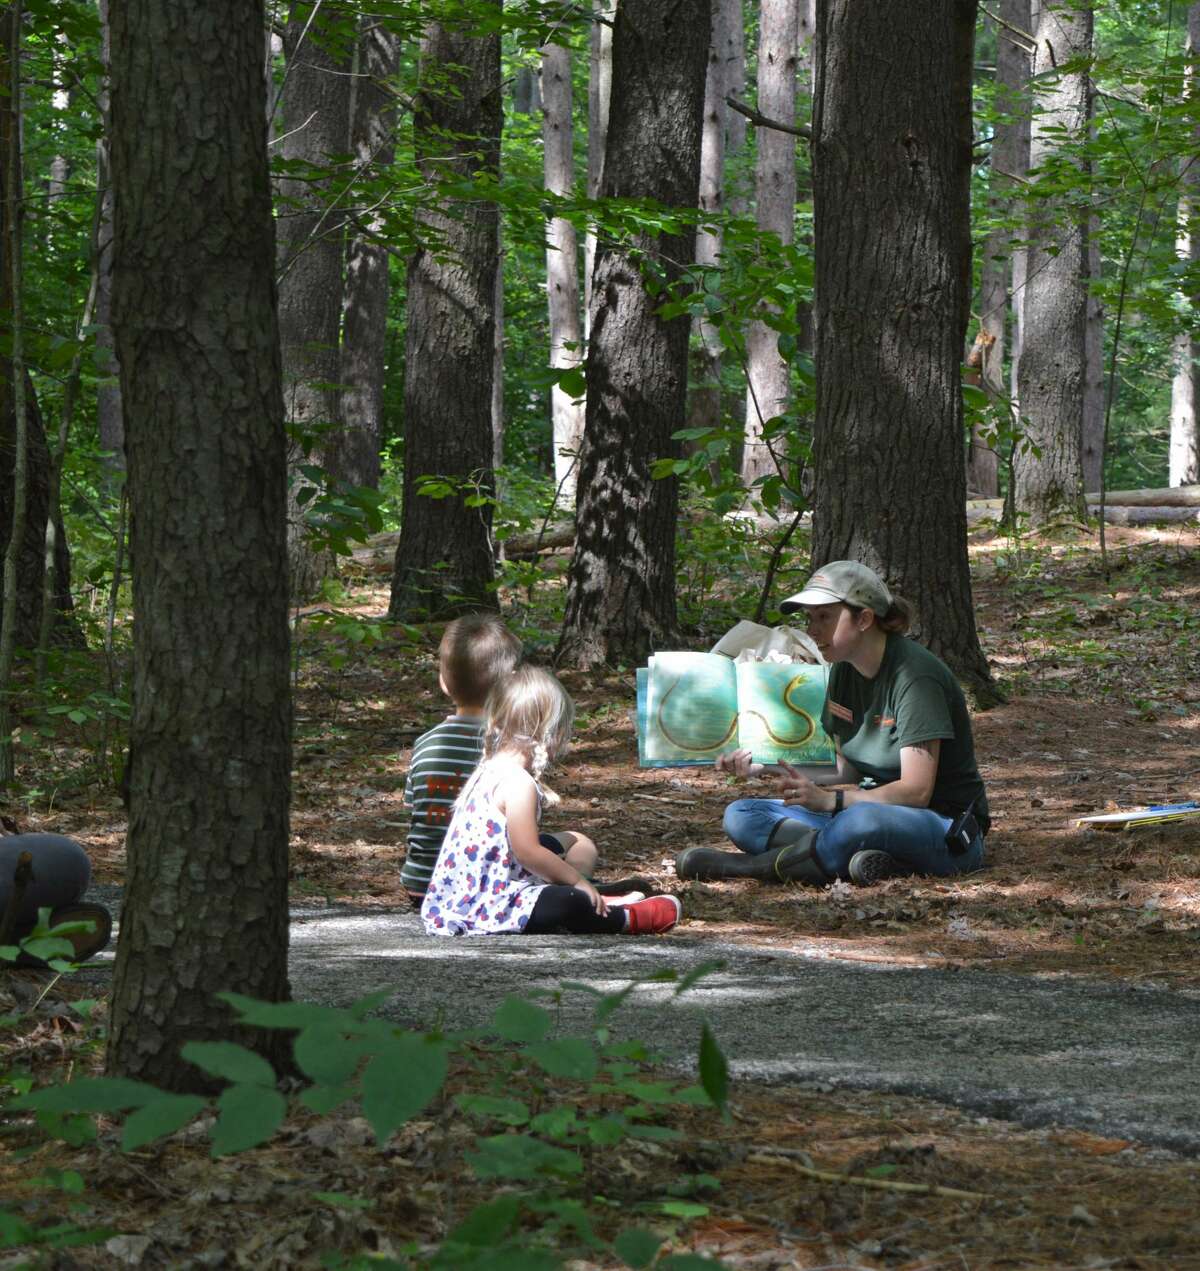 A Story Hour is set to take place at Chippewa Nature Center. (Photo provided/Chippewa Nature Center)